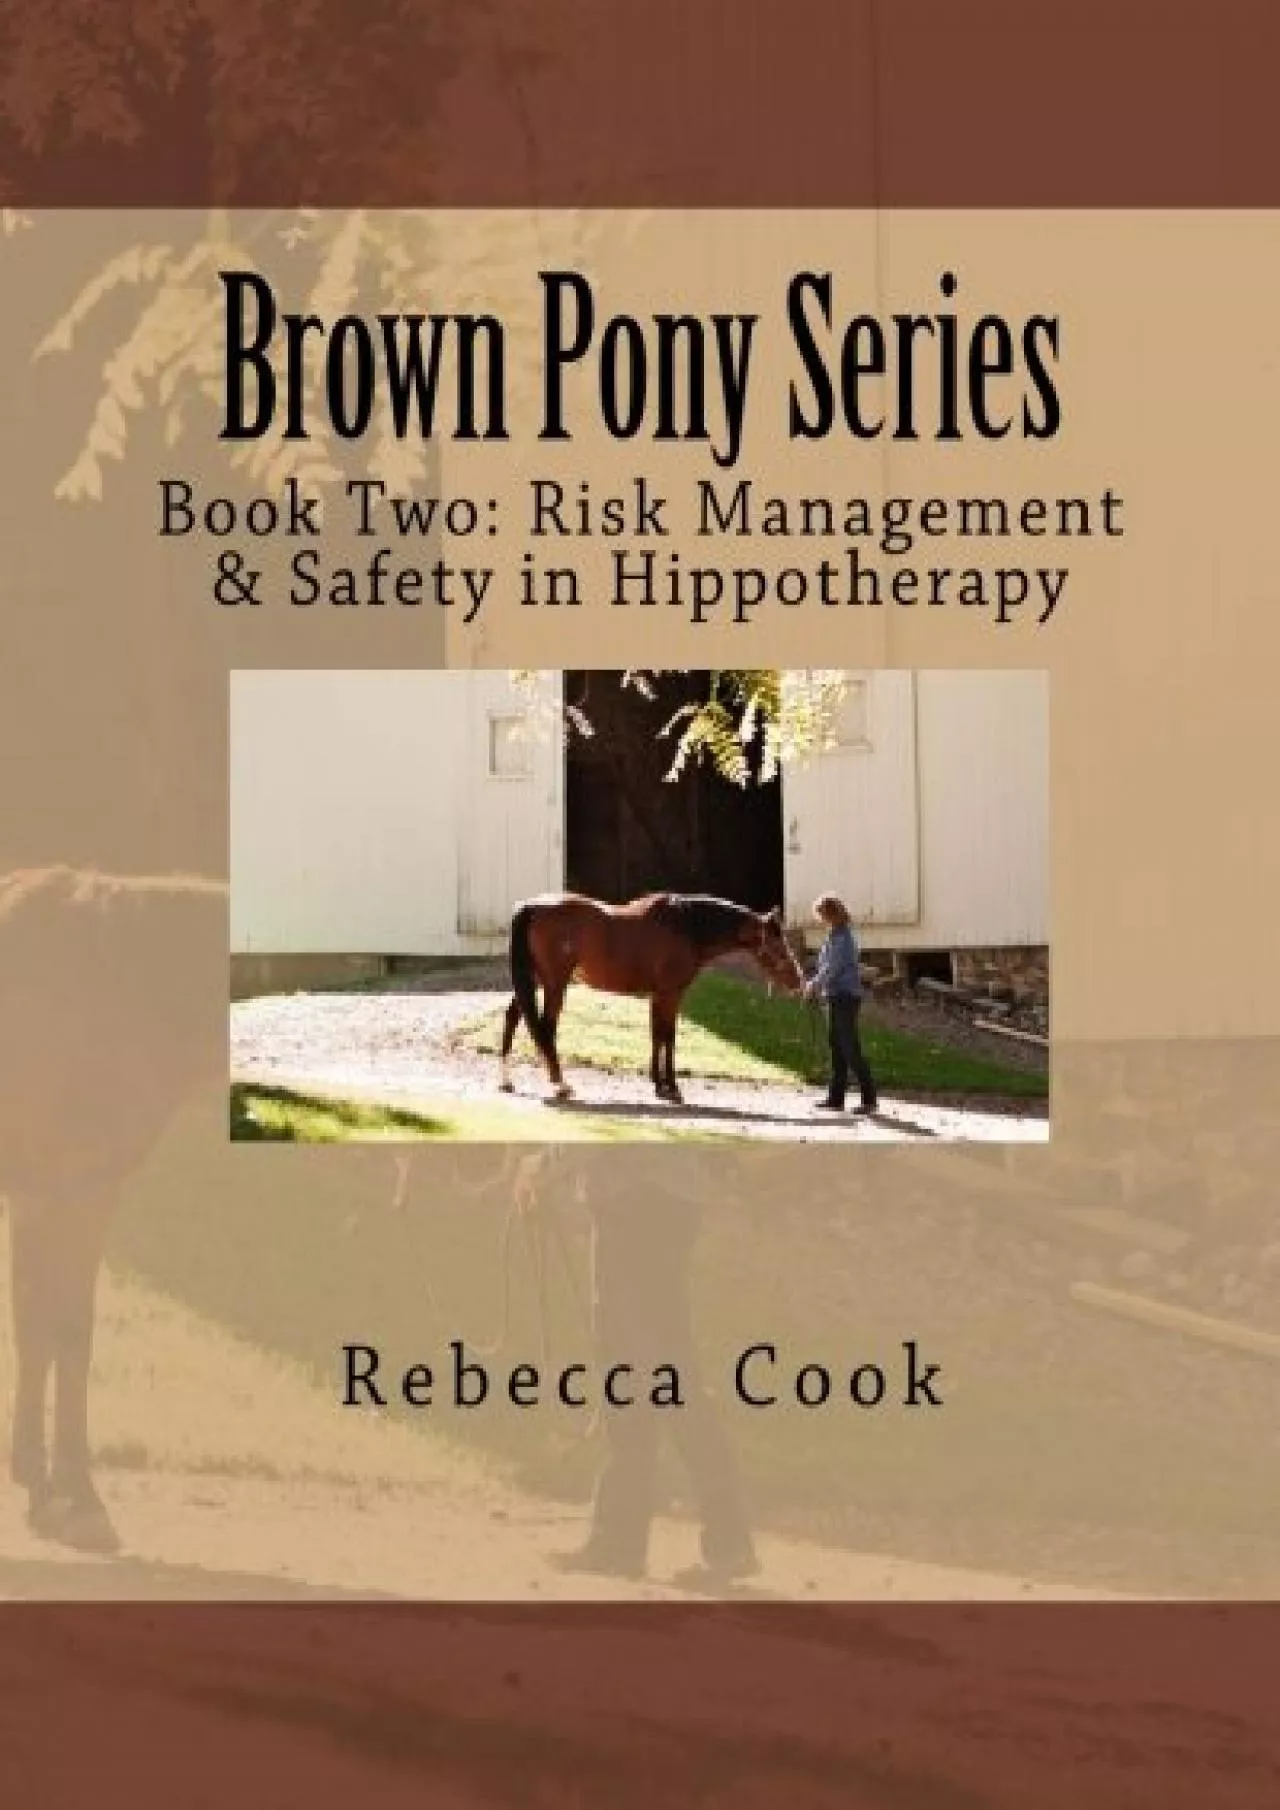 (BOOK)-Brown Pony Series: Book Two: Risk Management & Safety in Hippotherapy